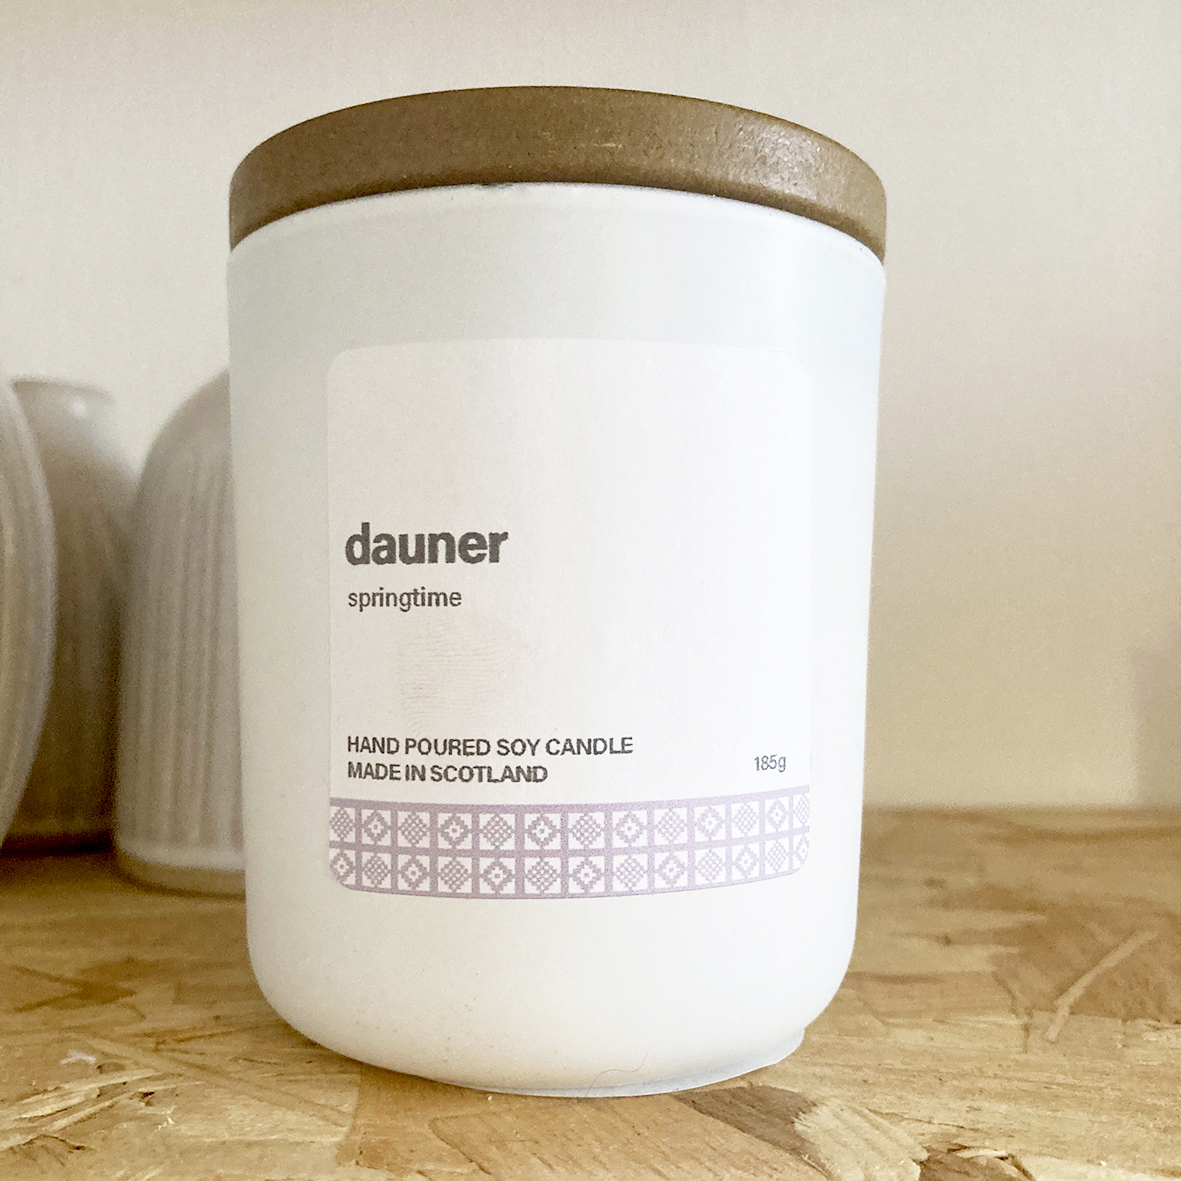 dauner soy candle